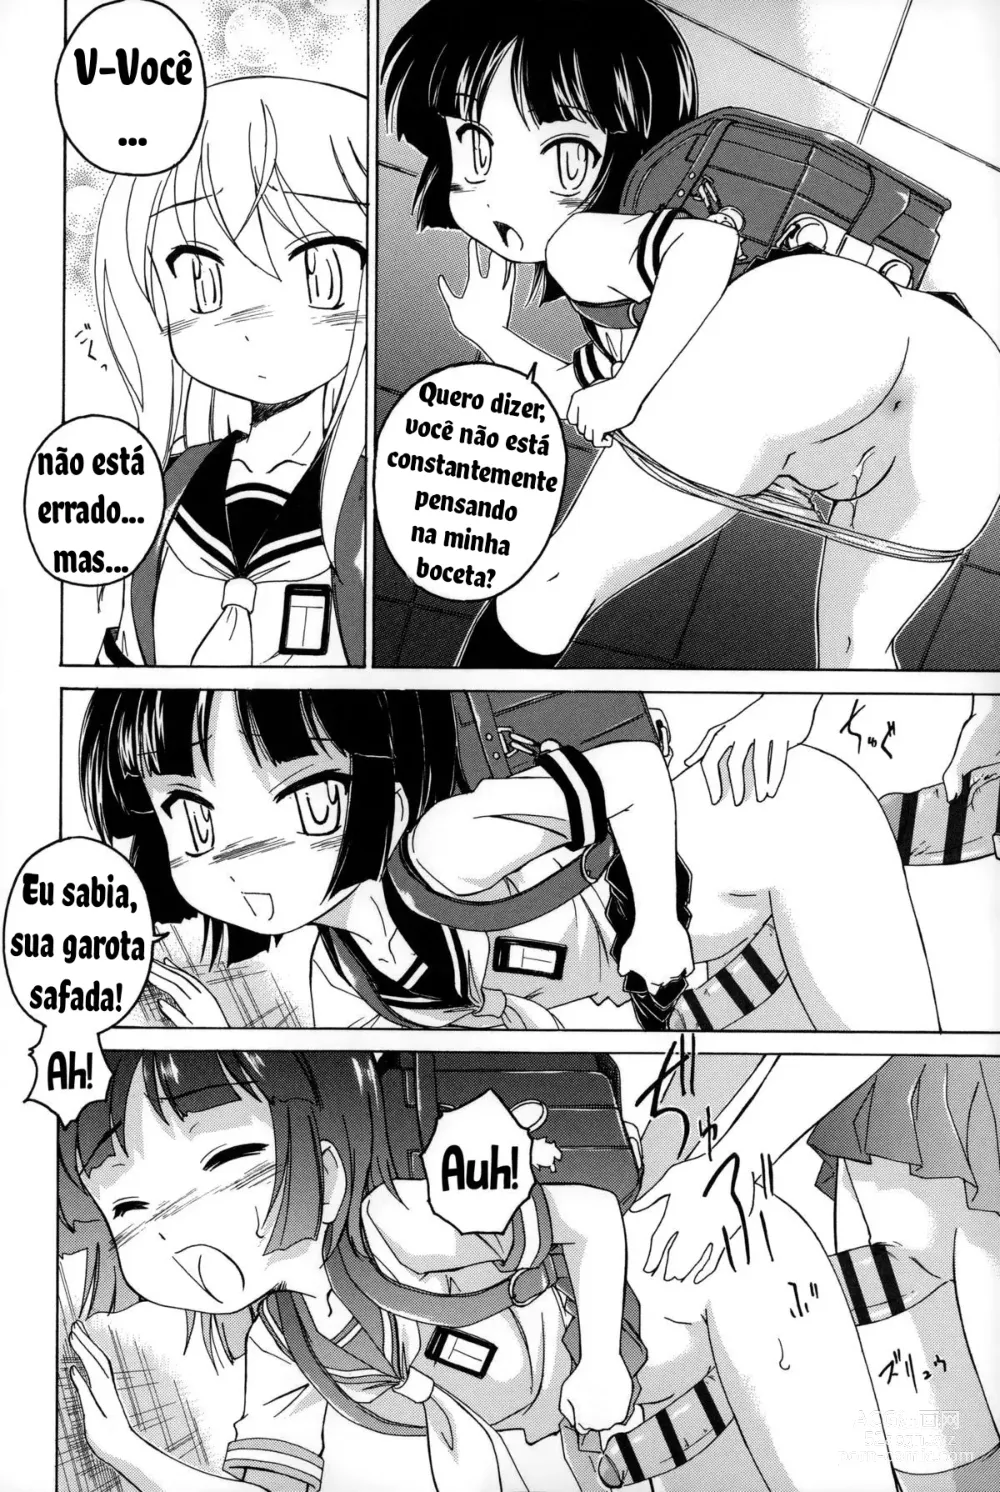 Page 12 of doujinshi The secret of Girls flowers